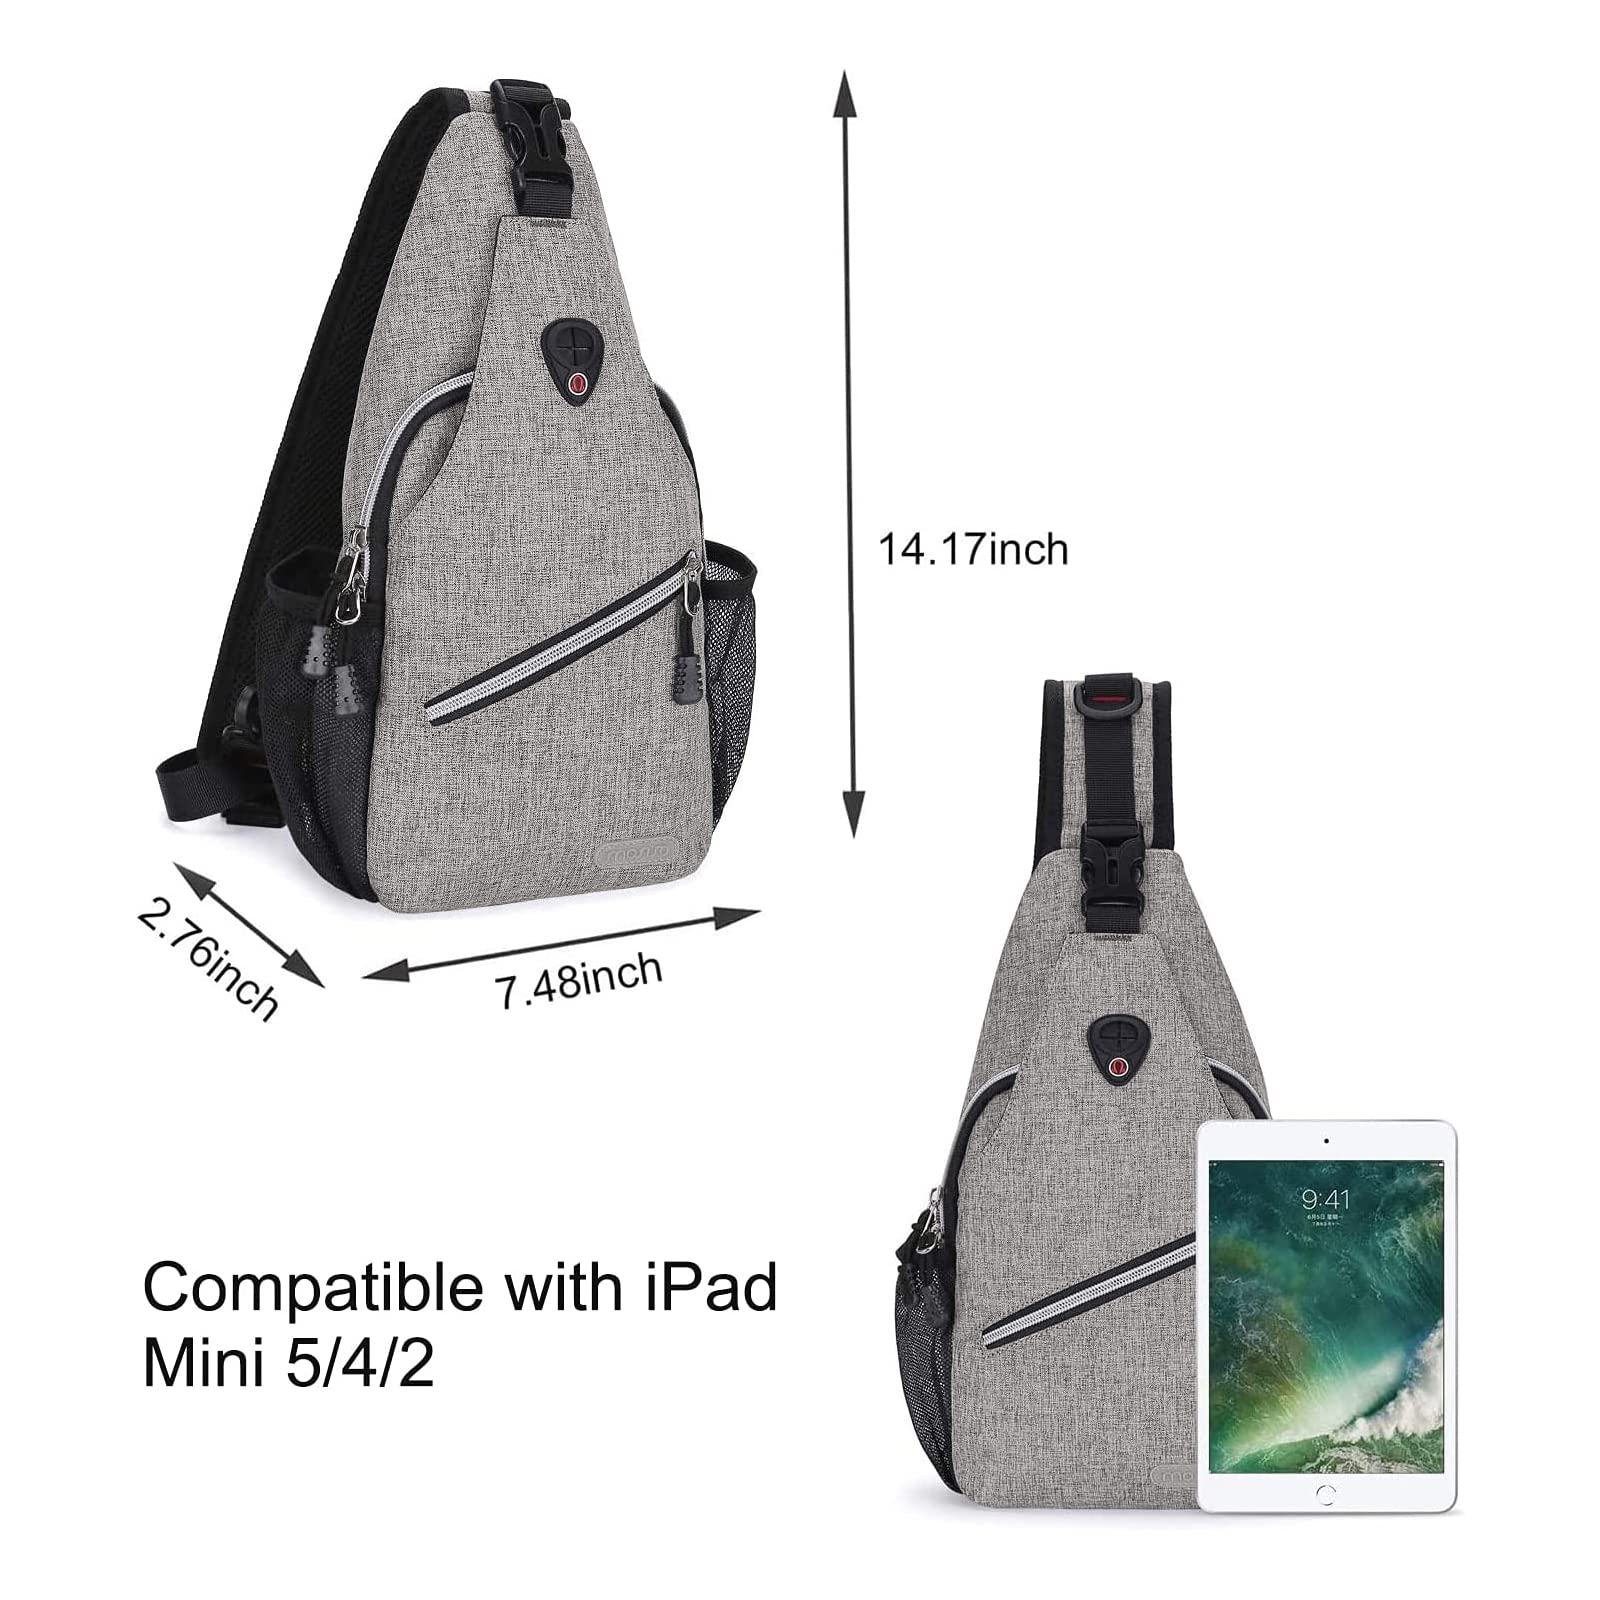 MOSISO Mini Sling Backpack,Small Hiking Daypack Travel Outdoor Casual Sports Bag